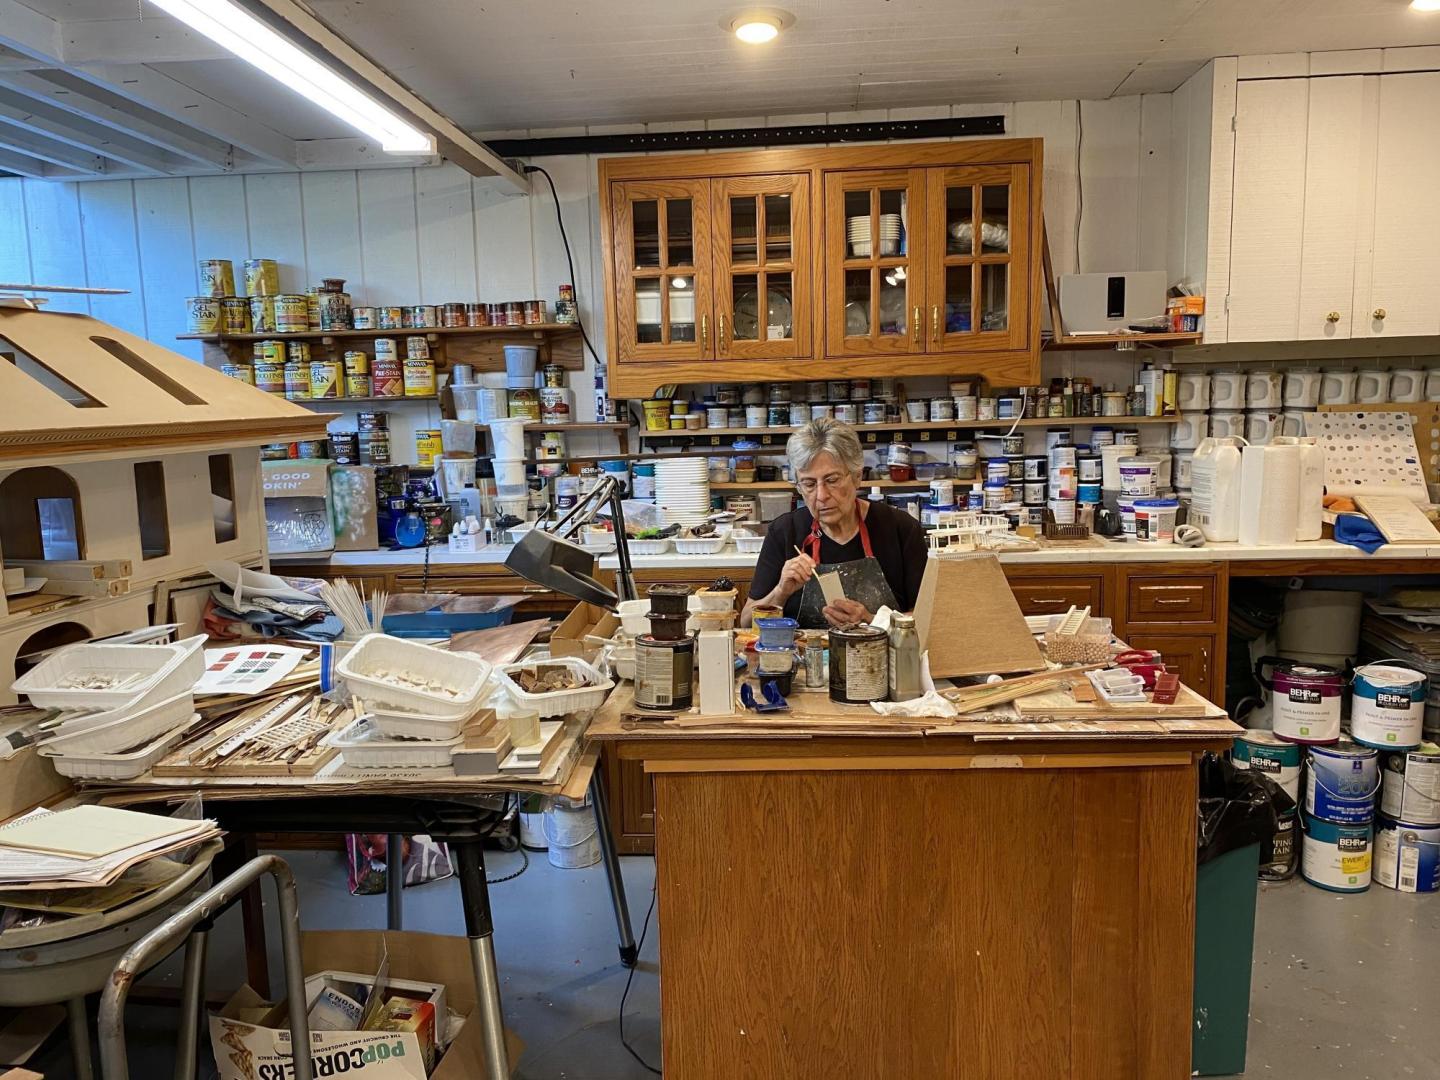 Sharon Ewert works on a detailed piece of a wooden dollhouse that she and her husband Norm are rebuilding in their basement workshop.